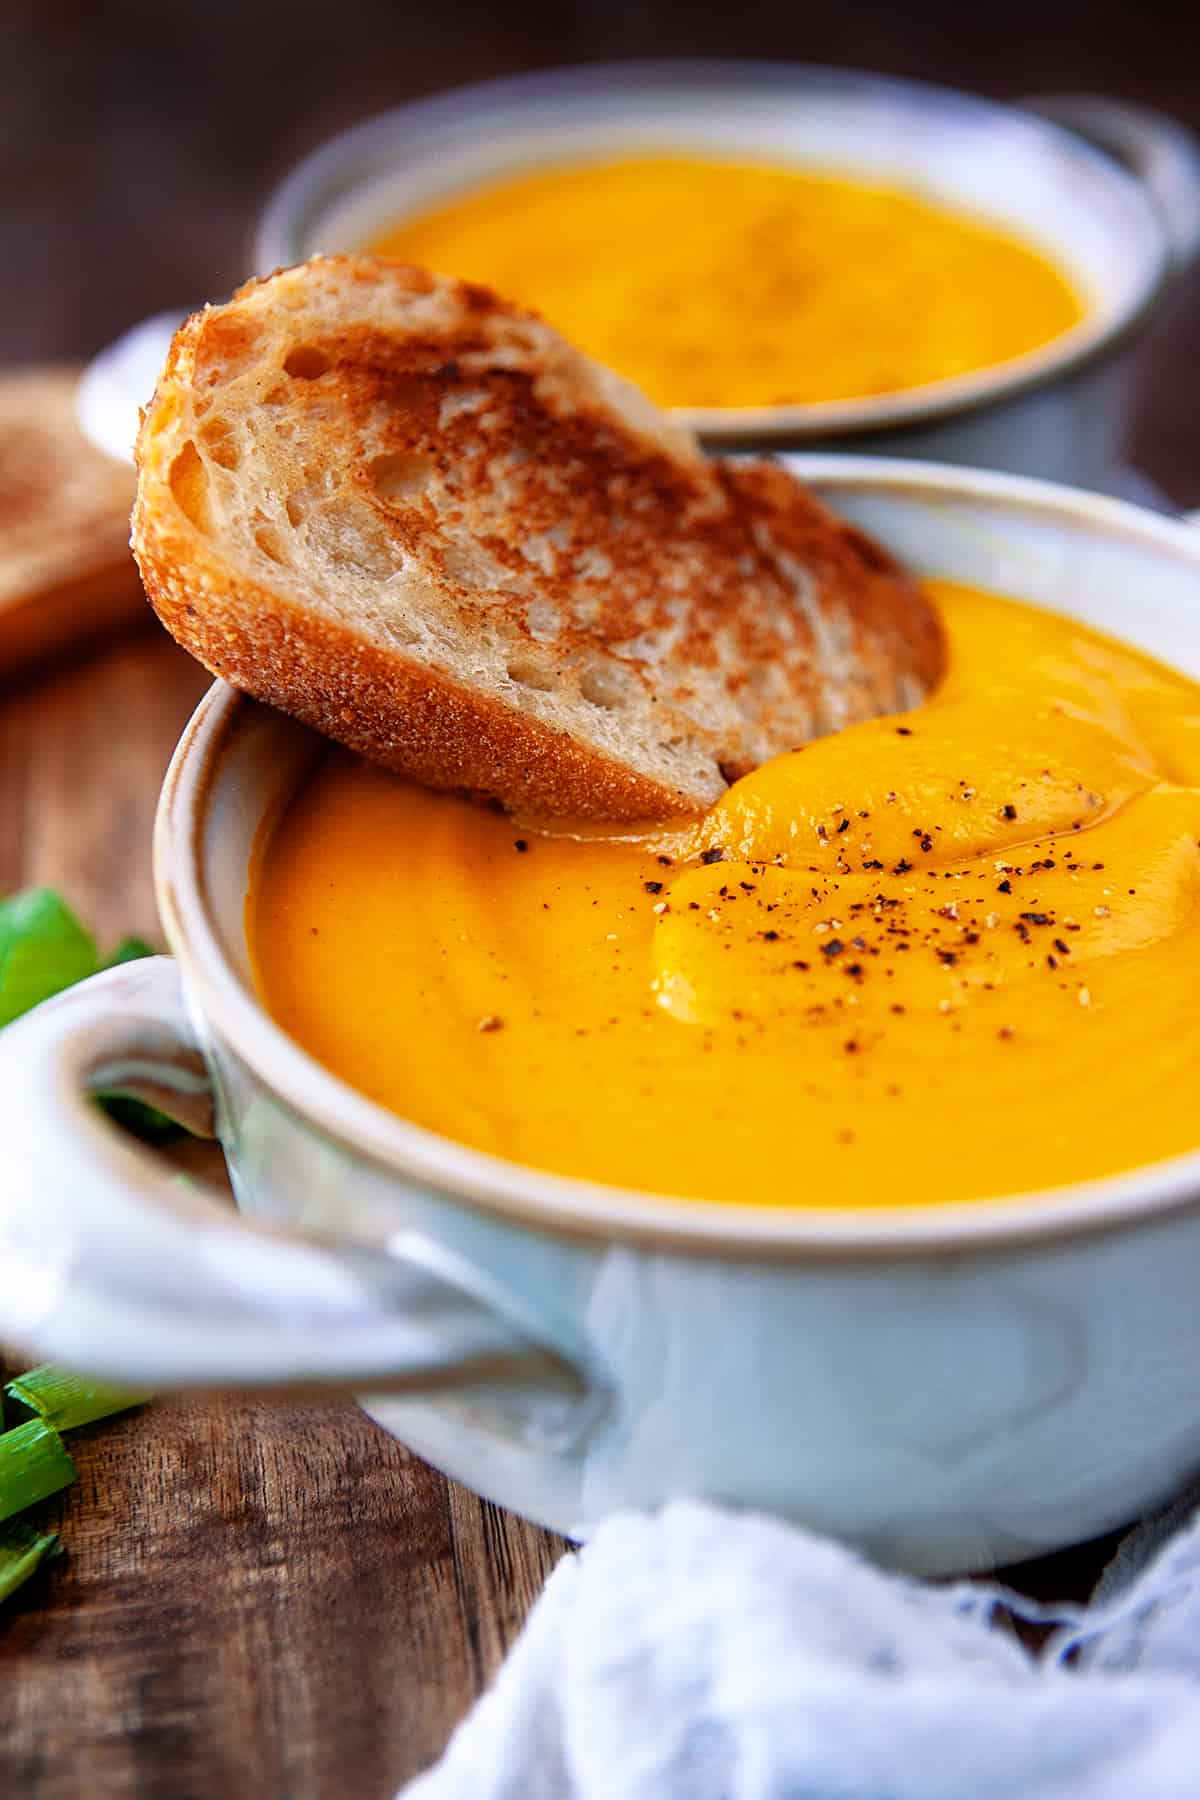 Bowl of carrot ginger soup with toasted artisan bread in the soup